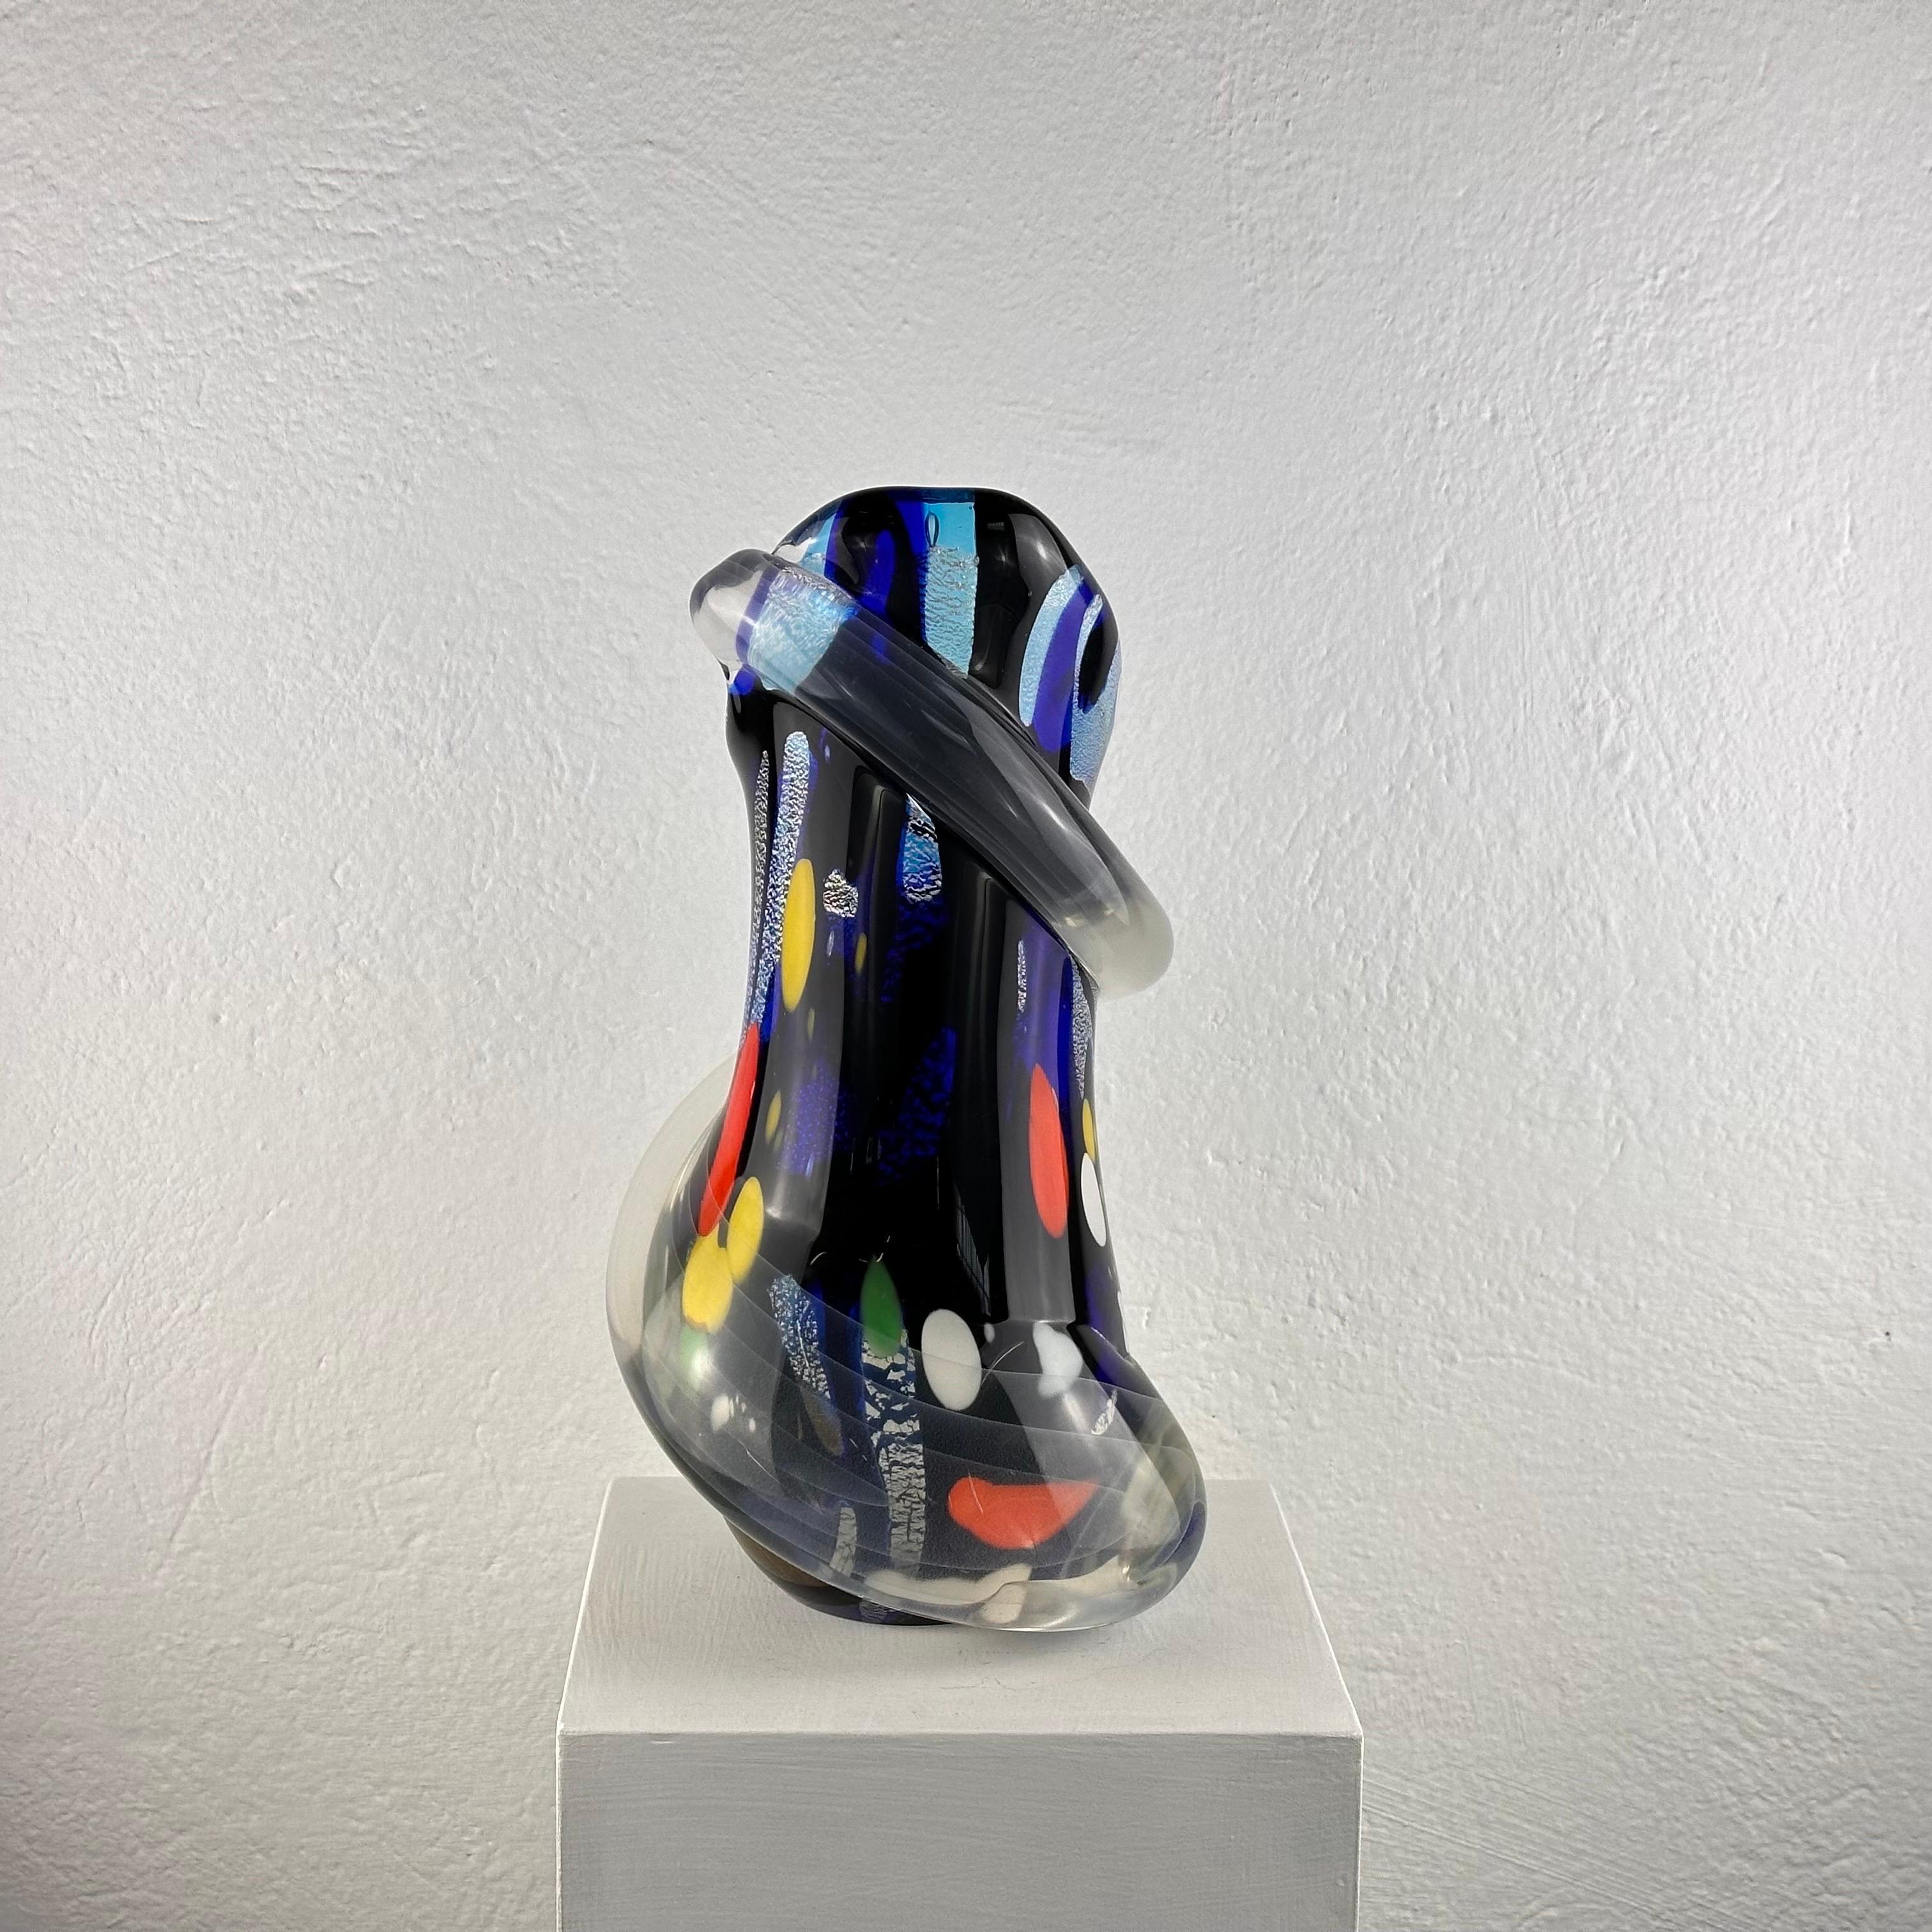 Italian Exquisite Abstract Murano Glass Vase by S. Toso, Signed 1970s Masterpiece For Sale